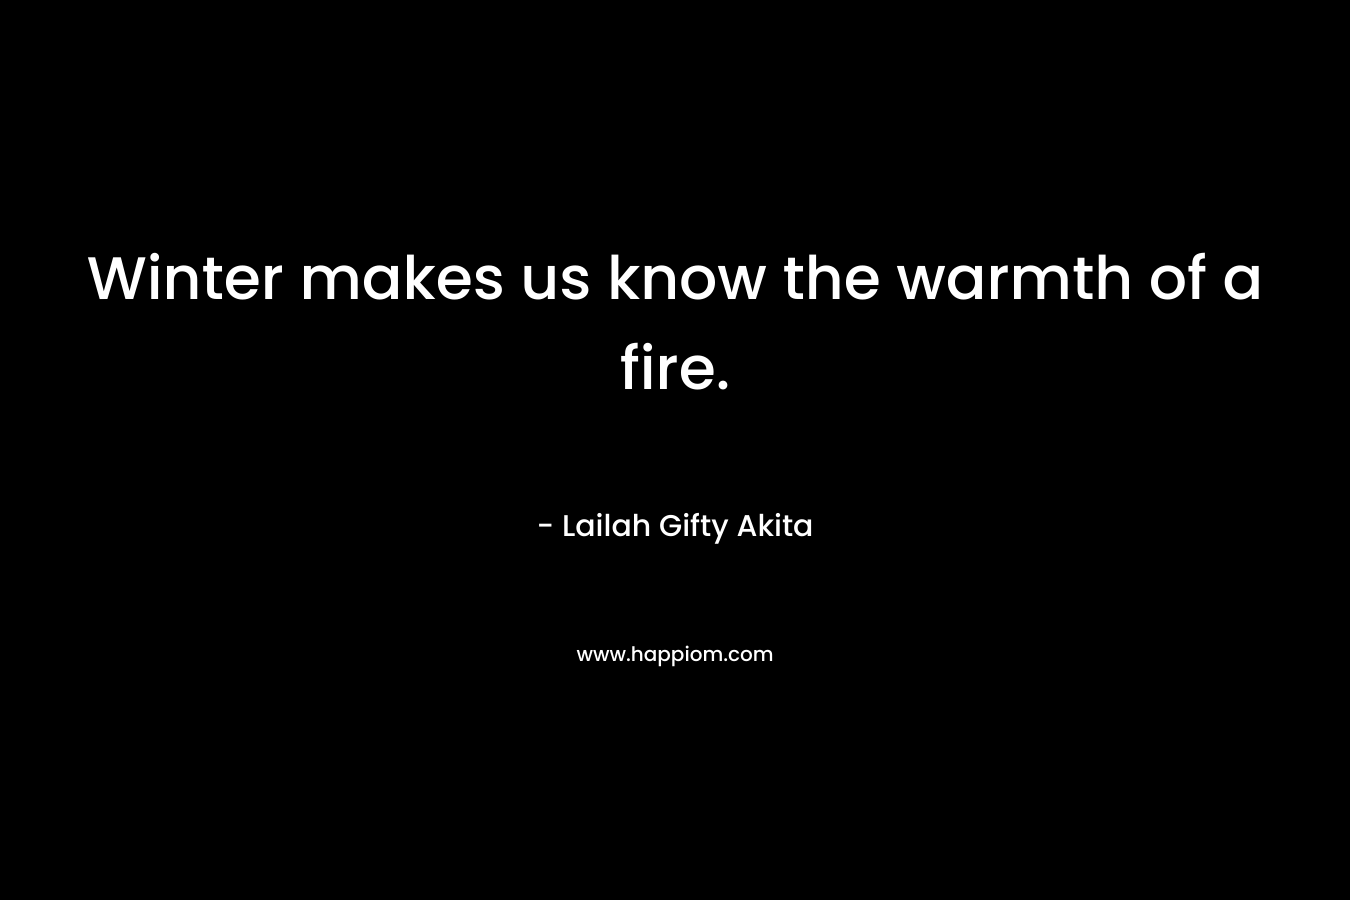 Winter makes us know the warmth of a fire. – Lailah Gifty Akita